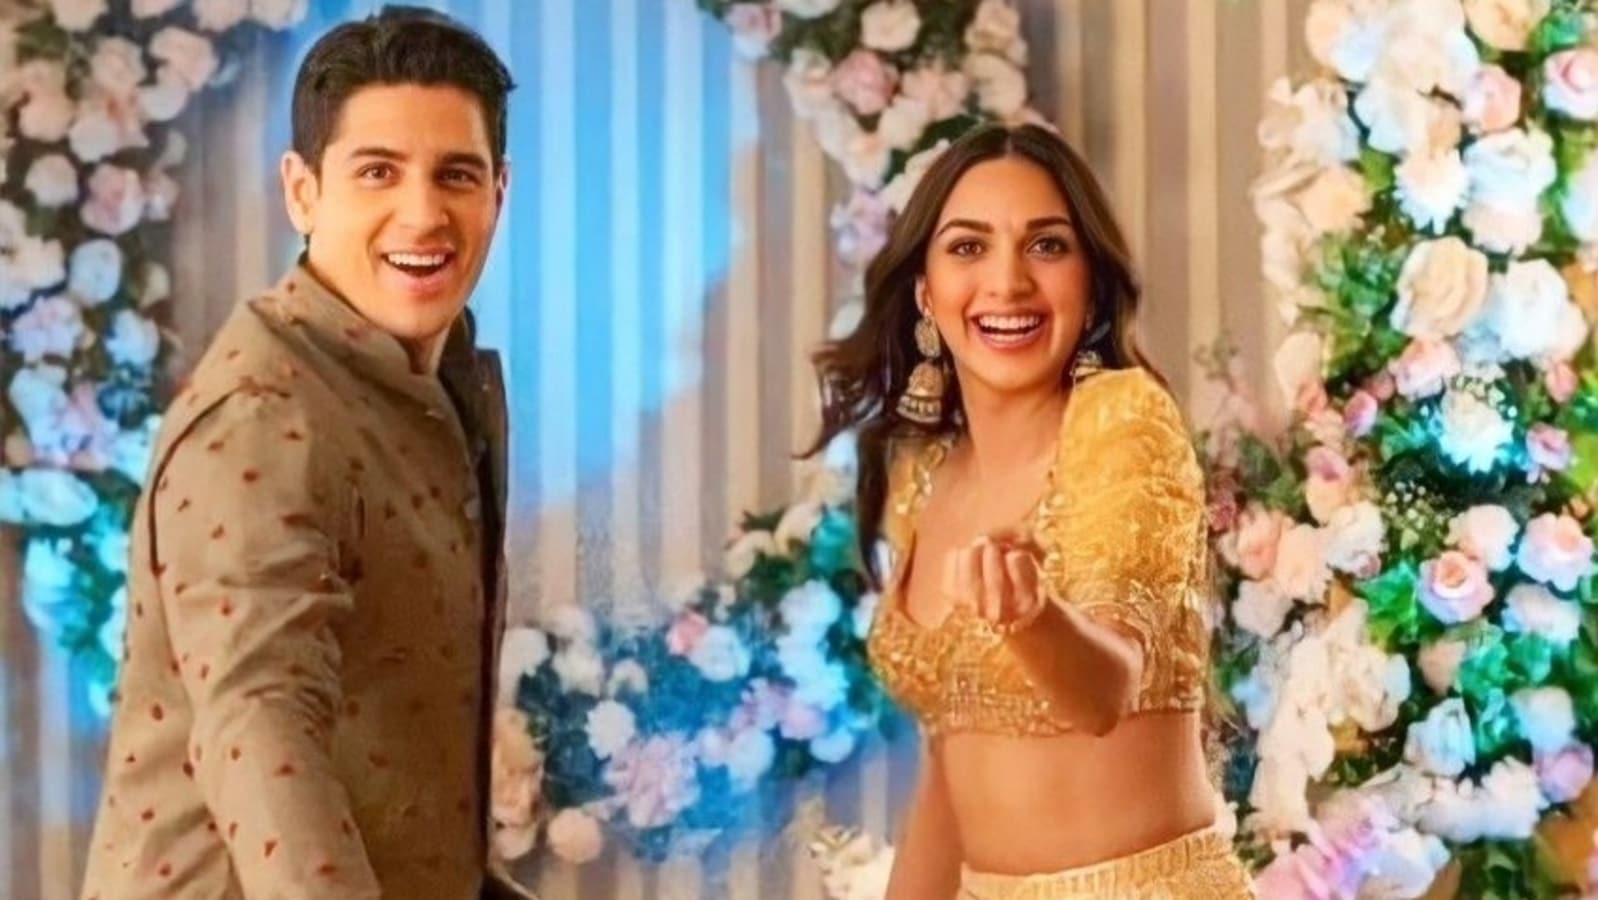 Fans say Sidharth Malhotra, Kiara Advani look ‘married’ in unseen video from ad shoot: ‘The way she looks at him’